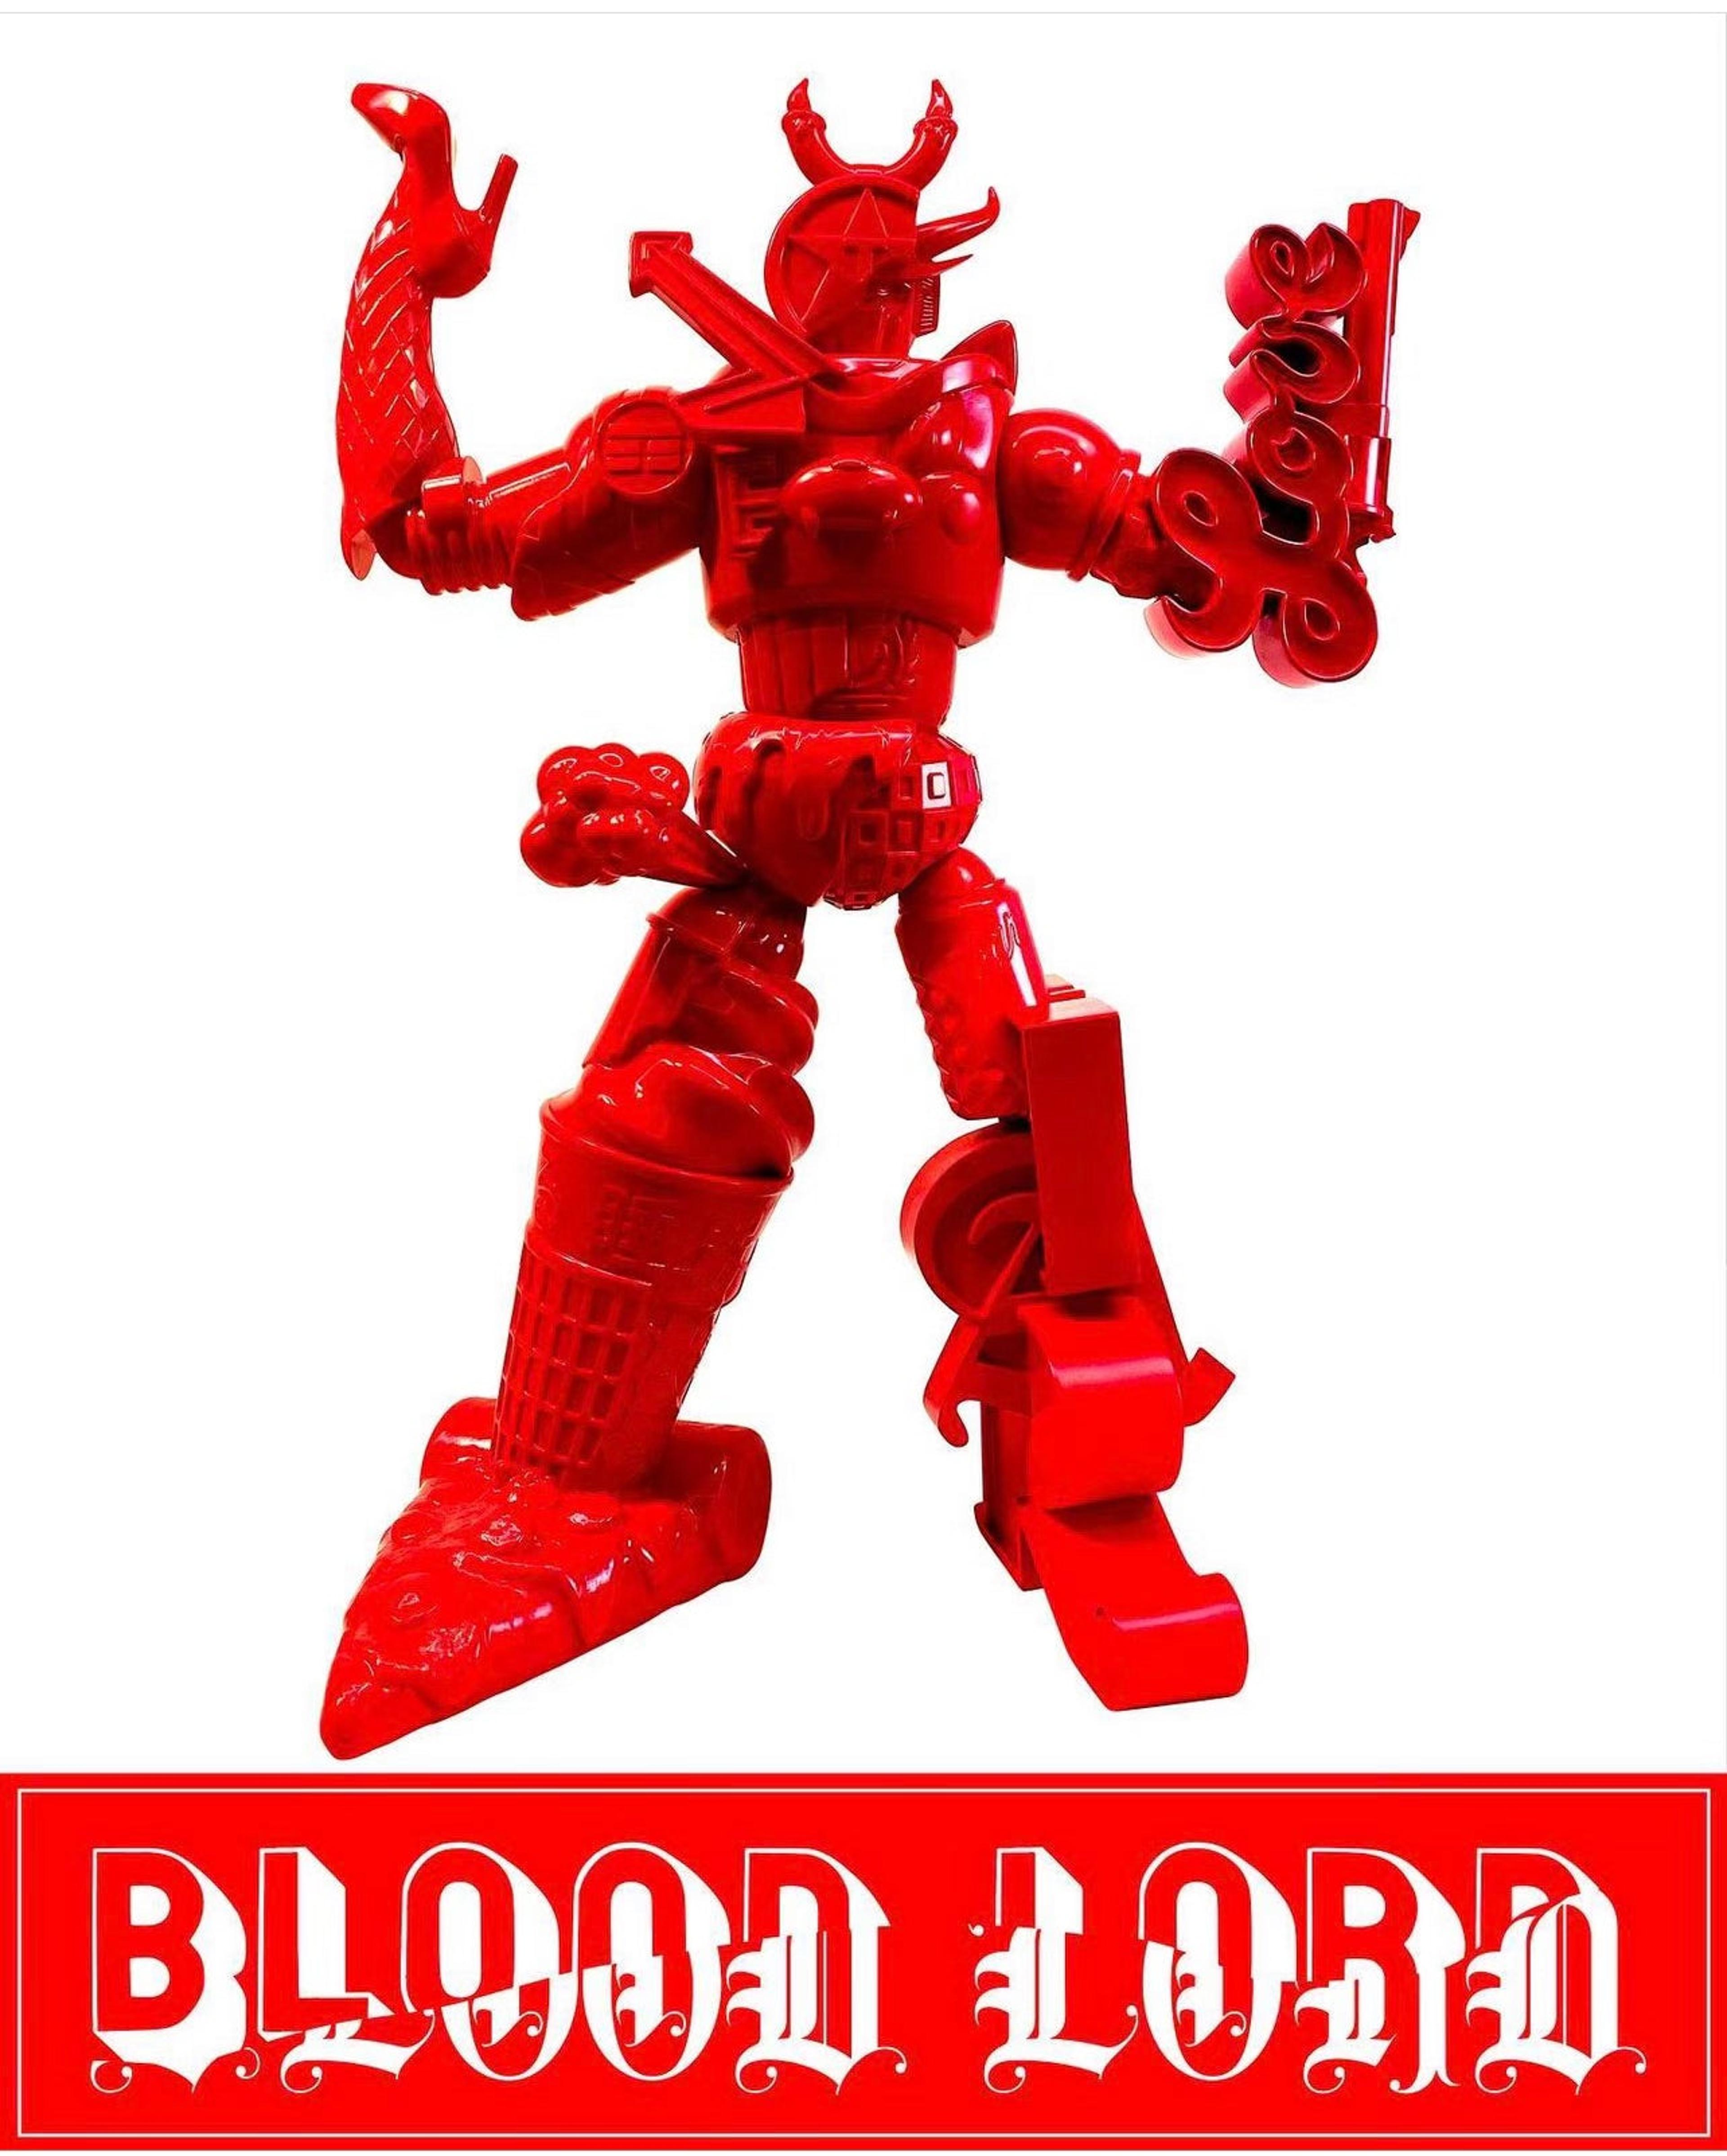 Blood Lord Red Vice Lord  Sculpture by Tristan Eaton Dcon 2022